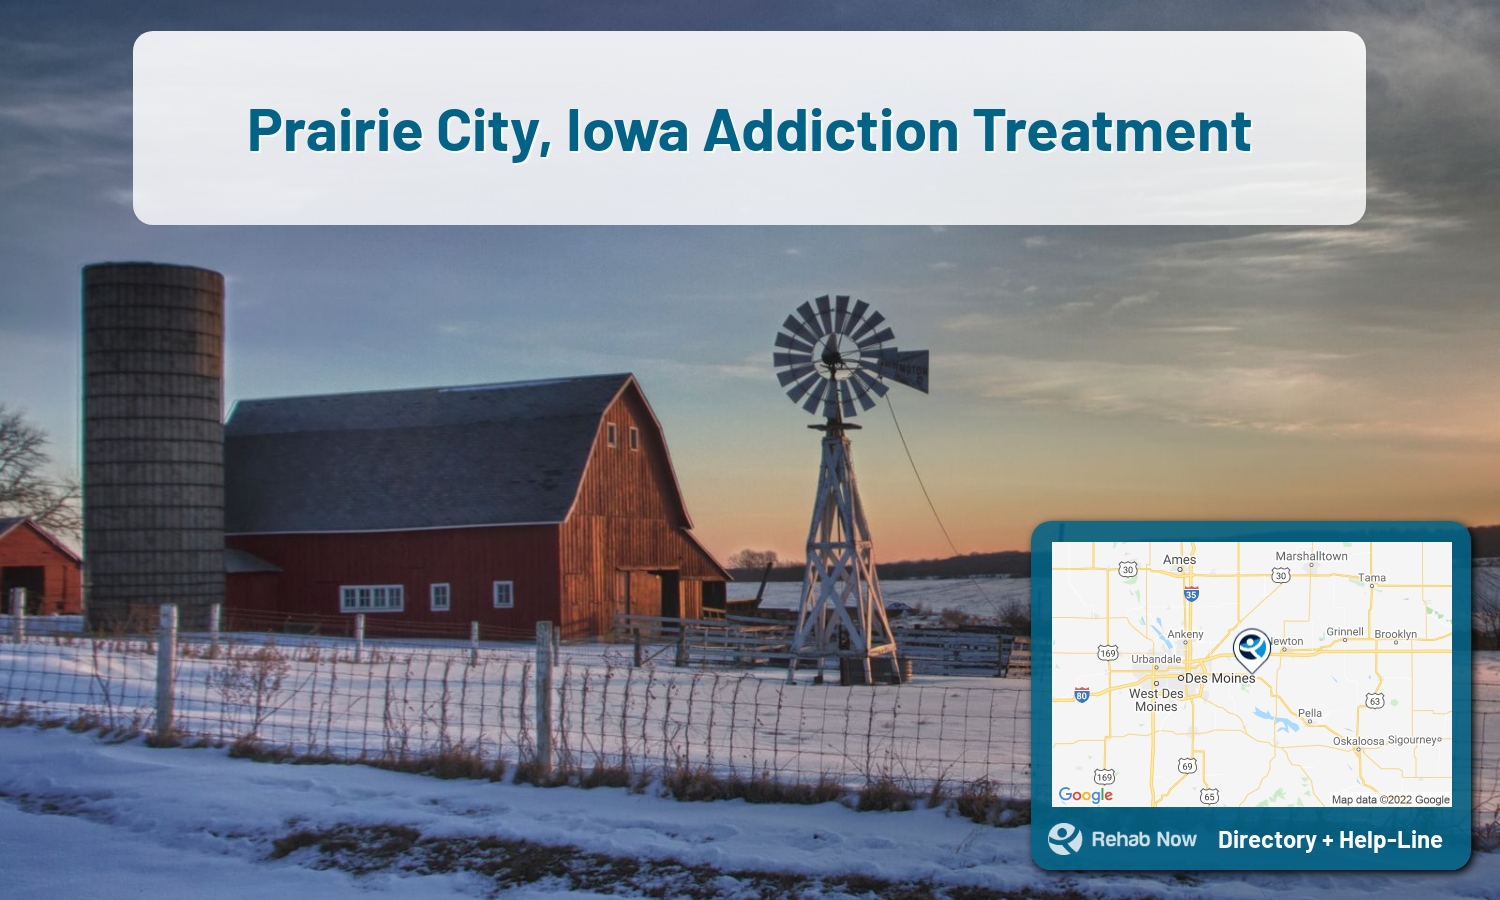 View options, availability, treatment methods, and more, for drug rehab and alcohol treatment in Prairie City, Iowa